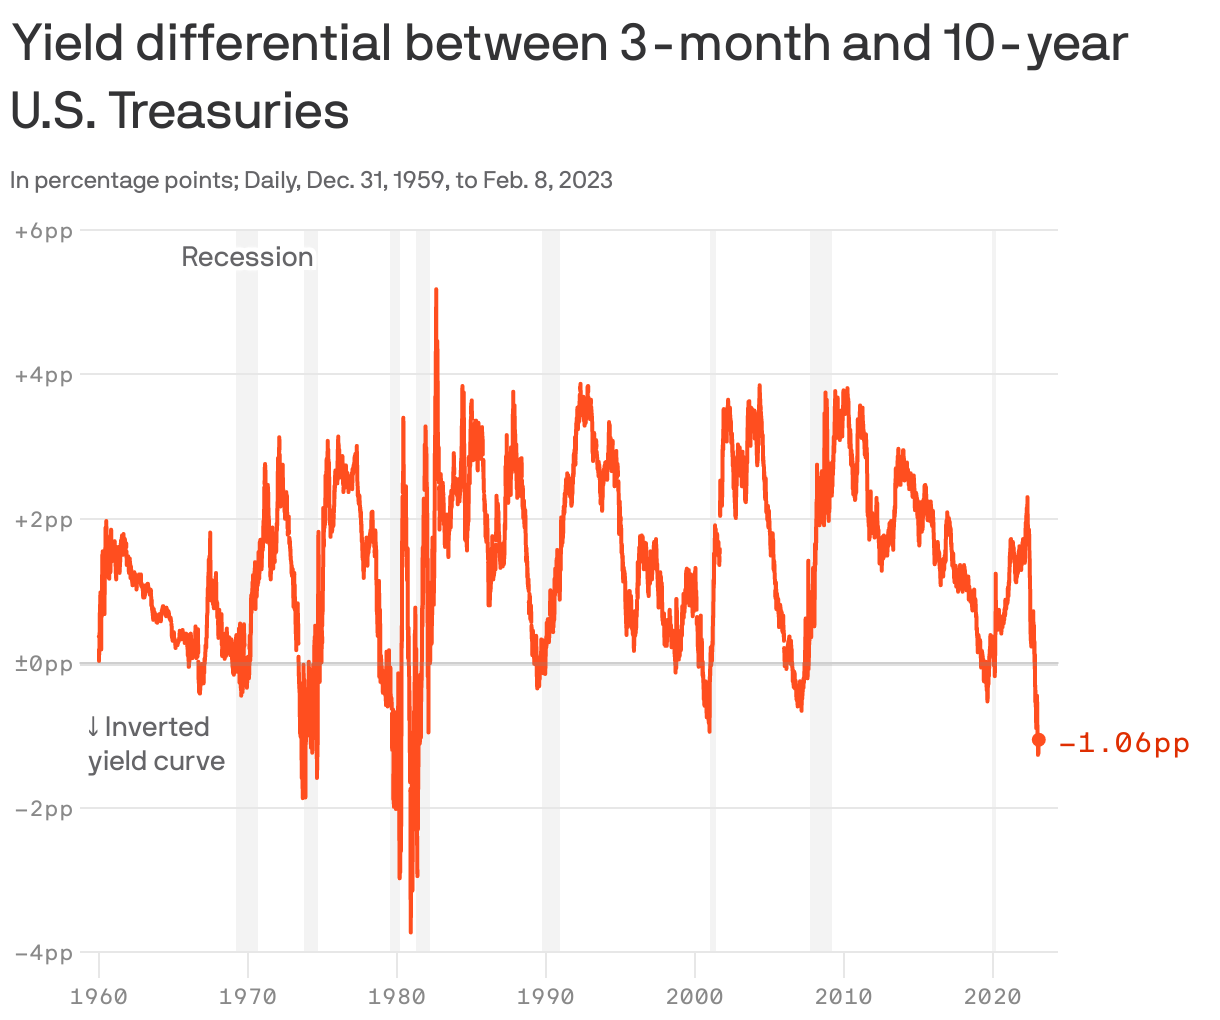 Yield differential between 3-month and 10-year U.S. Treasuries